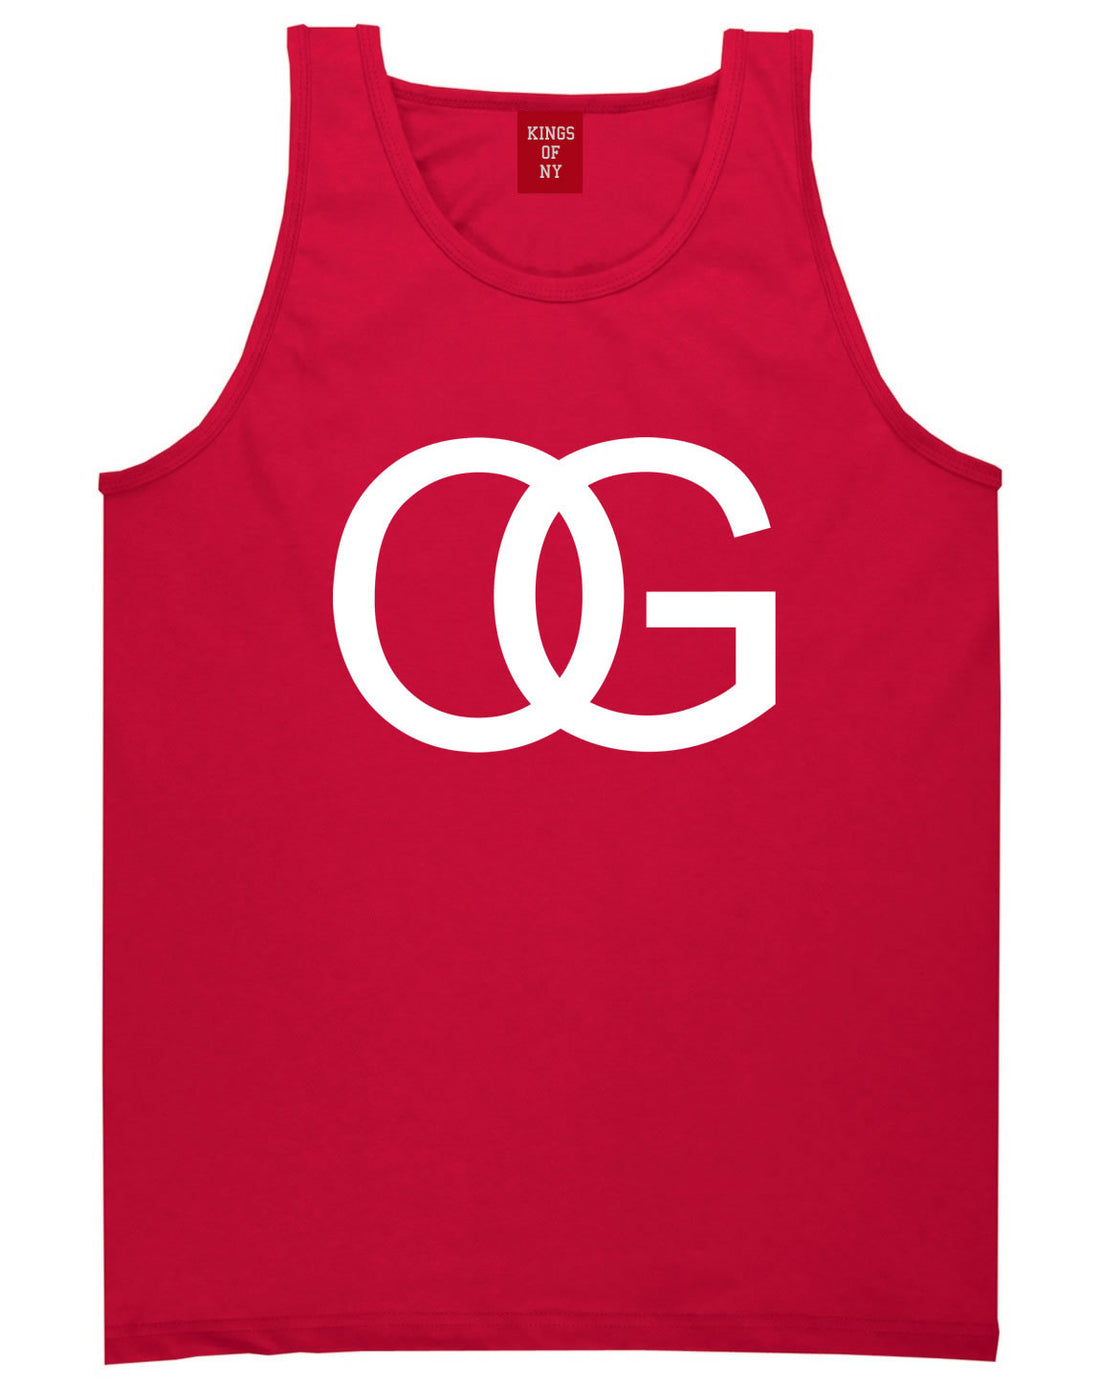 OG Original Gangsta Gangster Style Green Tank Top In Red by Kings Of NY